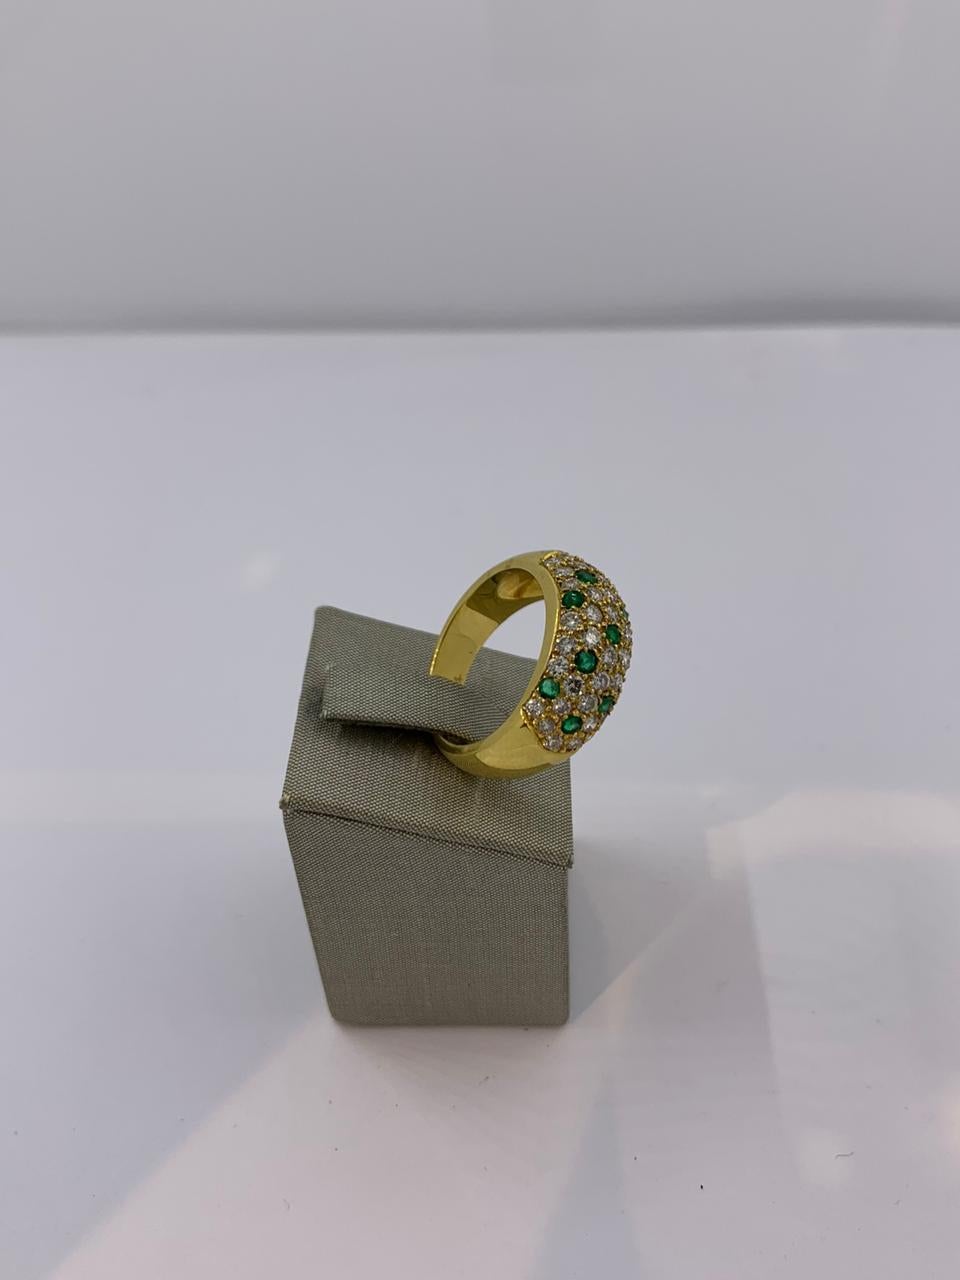 Emerald and Diamond Ring
Emeralds 0.38 ct
Diamonds 1.24 ct
st in 18Kt Yellow Gold
21-11981